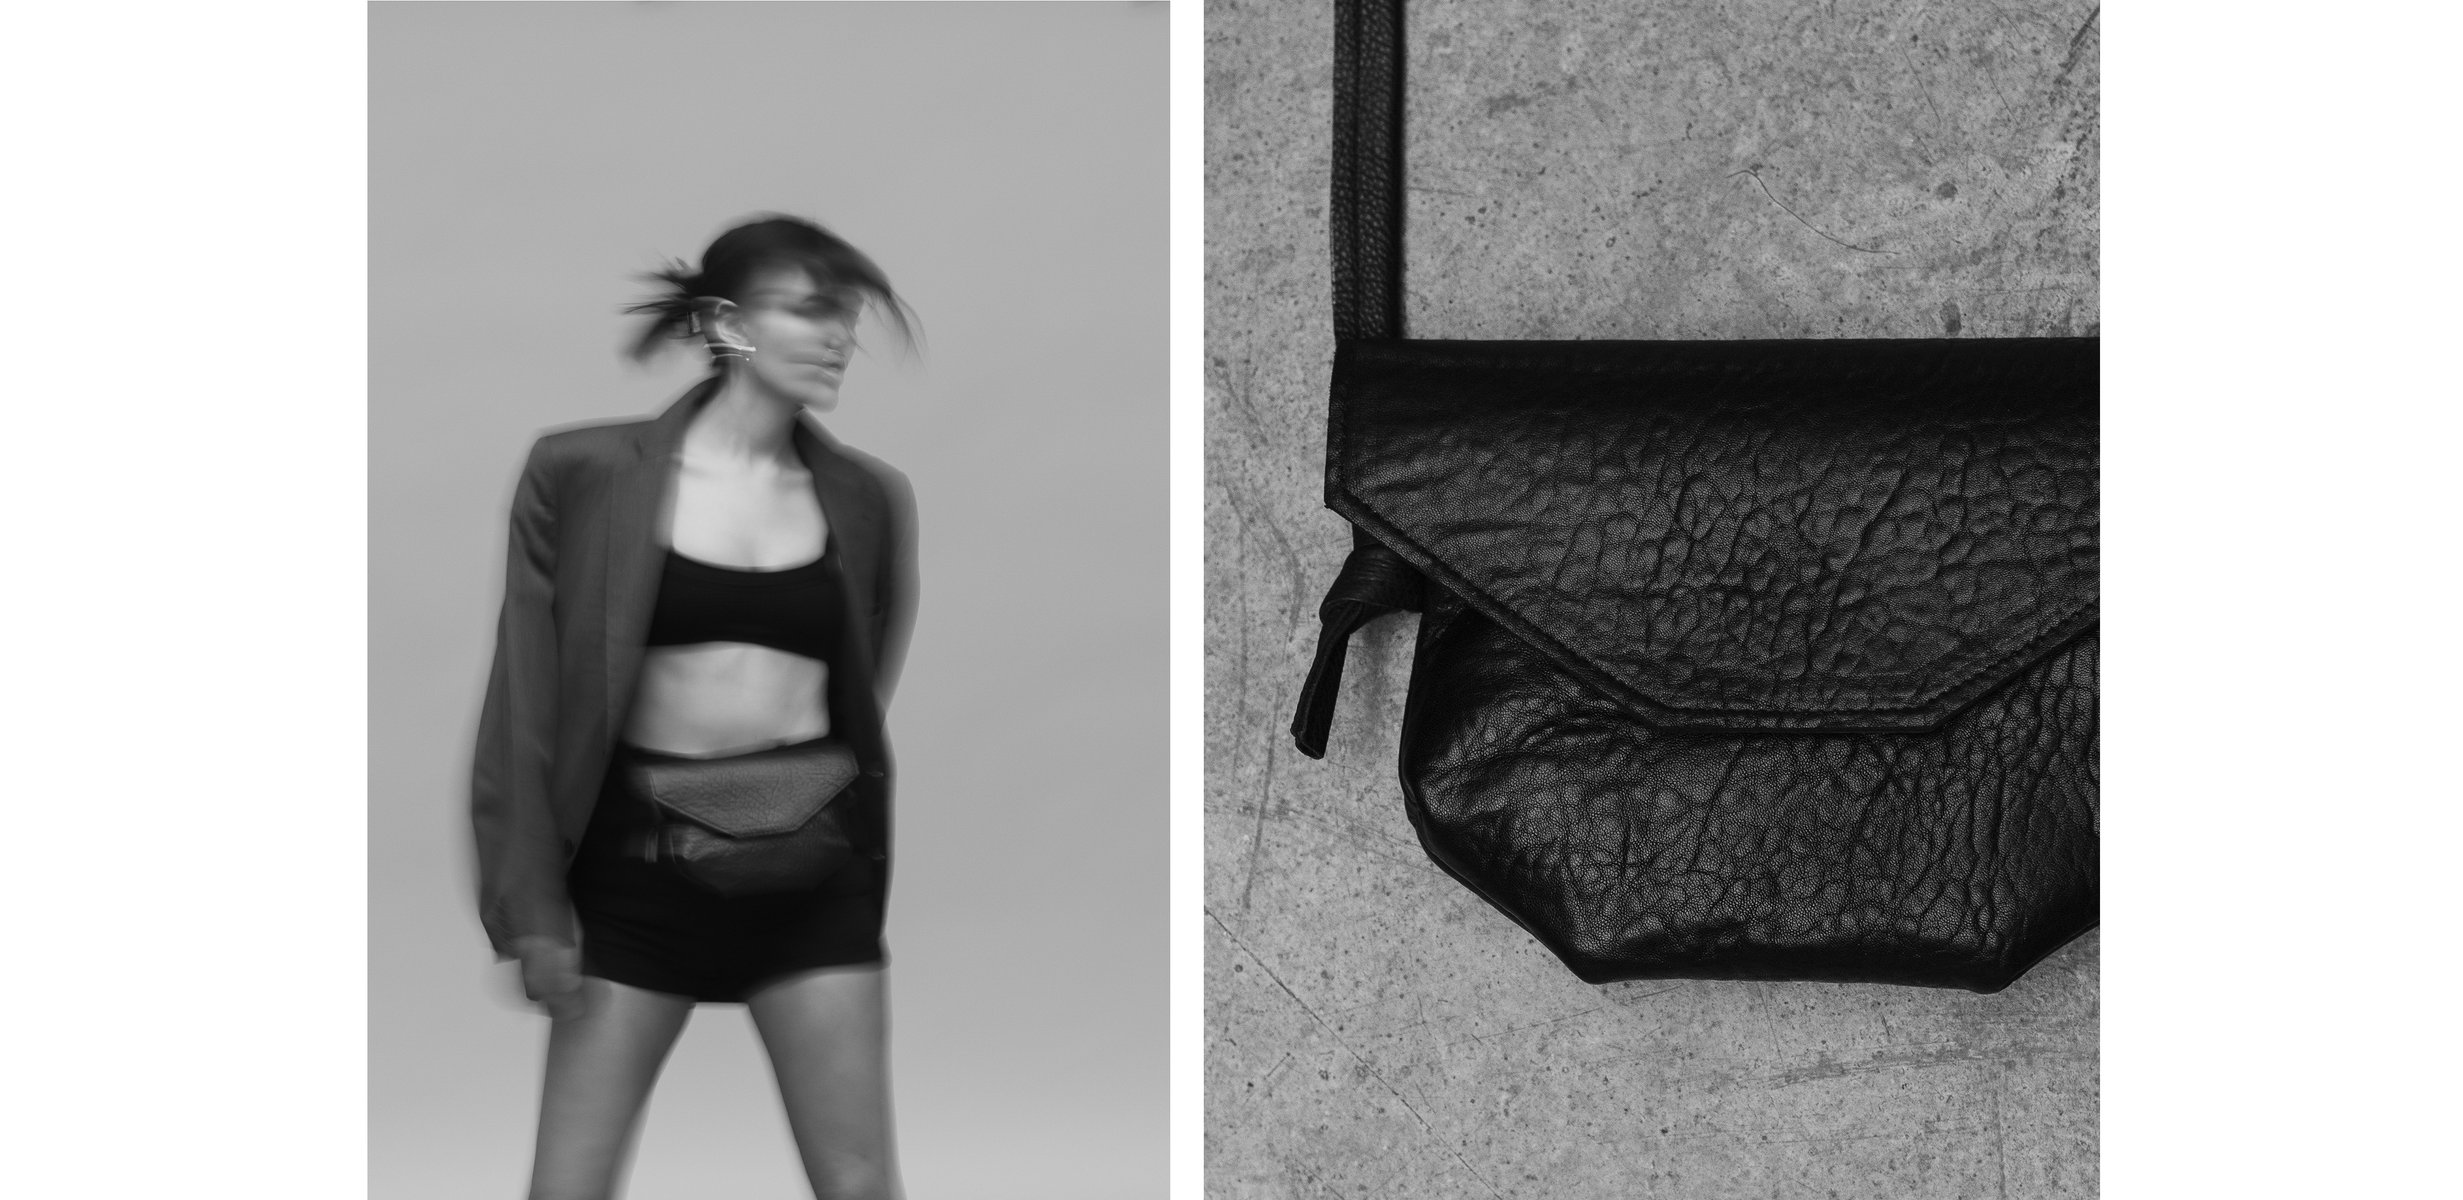  Sister Epic
Diptych:

Left image: a black and white image of a white woman who is blurred and in motion, wearing a bandeau, a blazer, black shorts, and a black leather Sister Epic bag on her hips.

Right image: a close up of the black pebbled leather back against a concrete floor. by Sydney SG